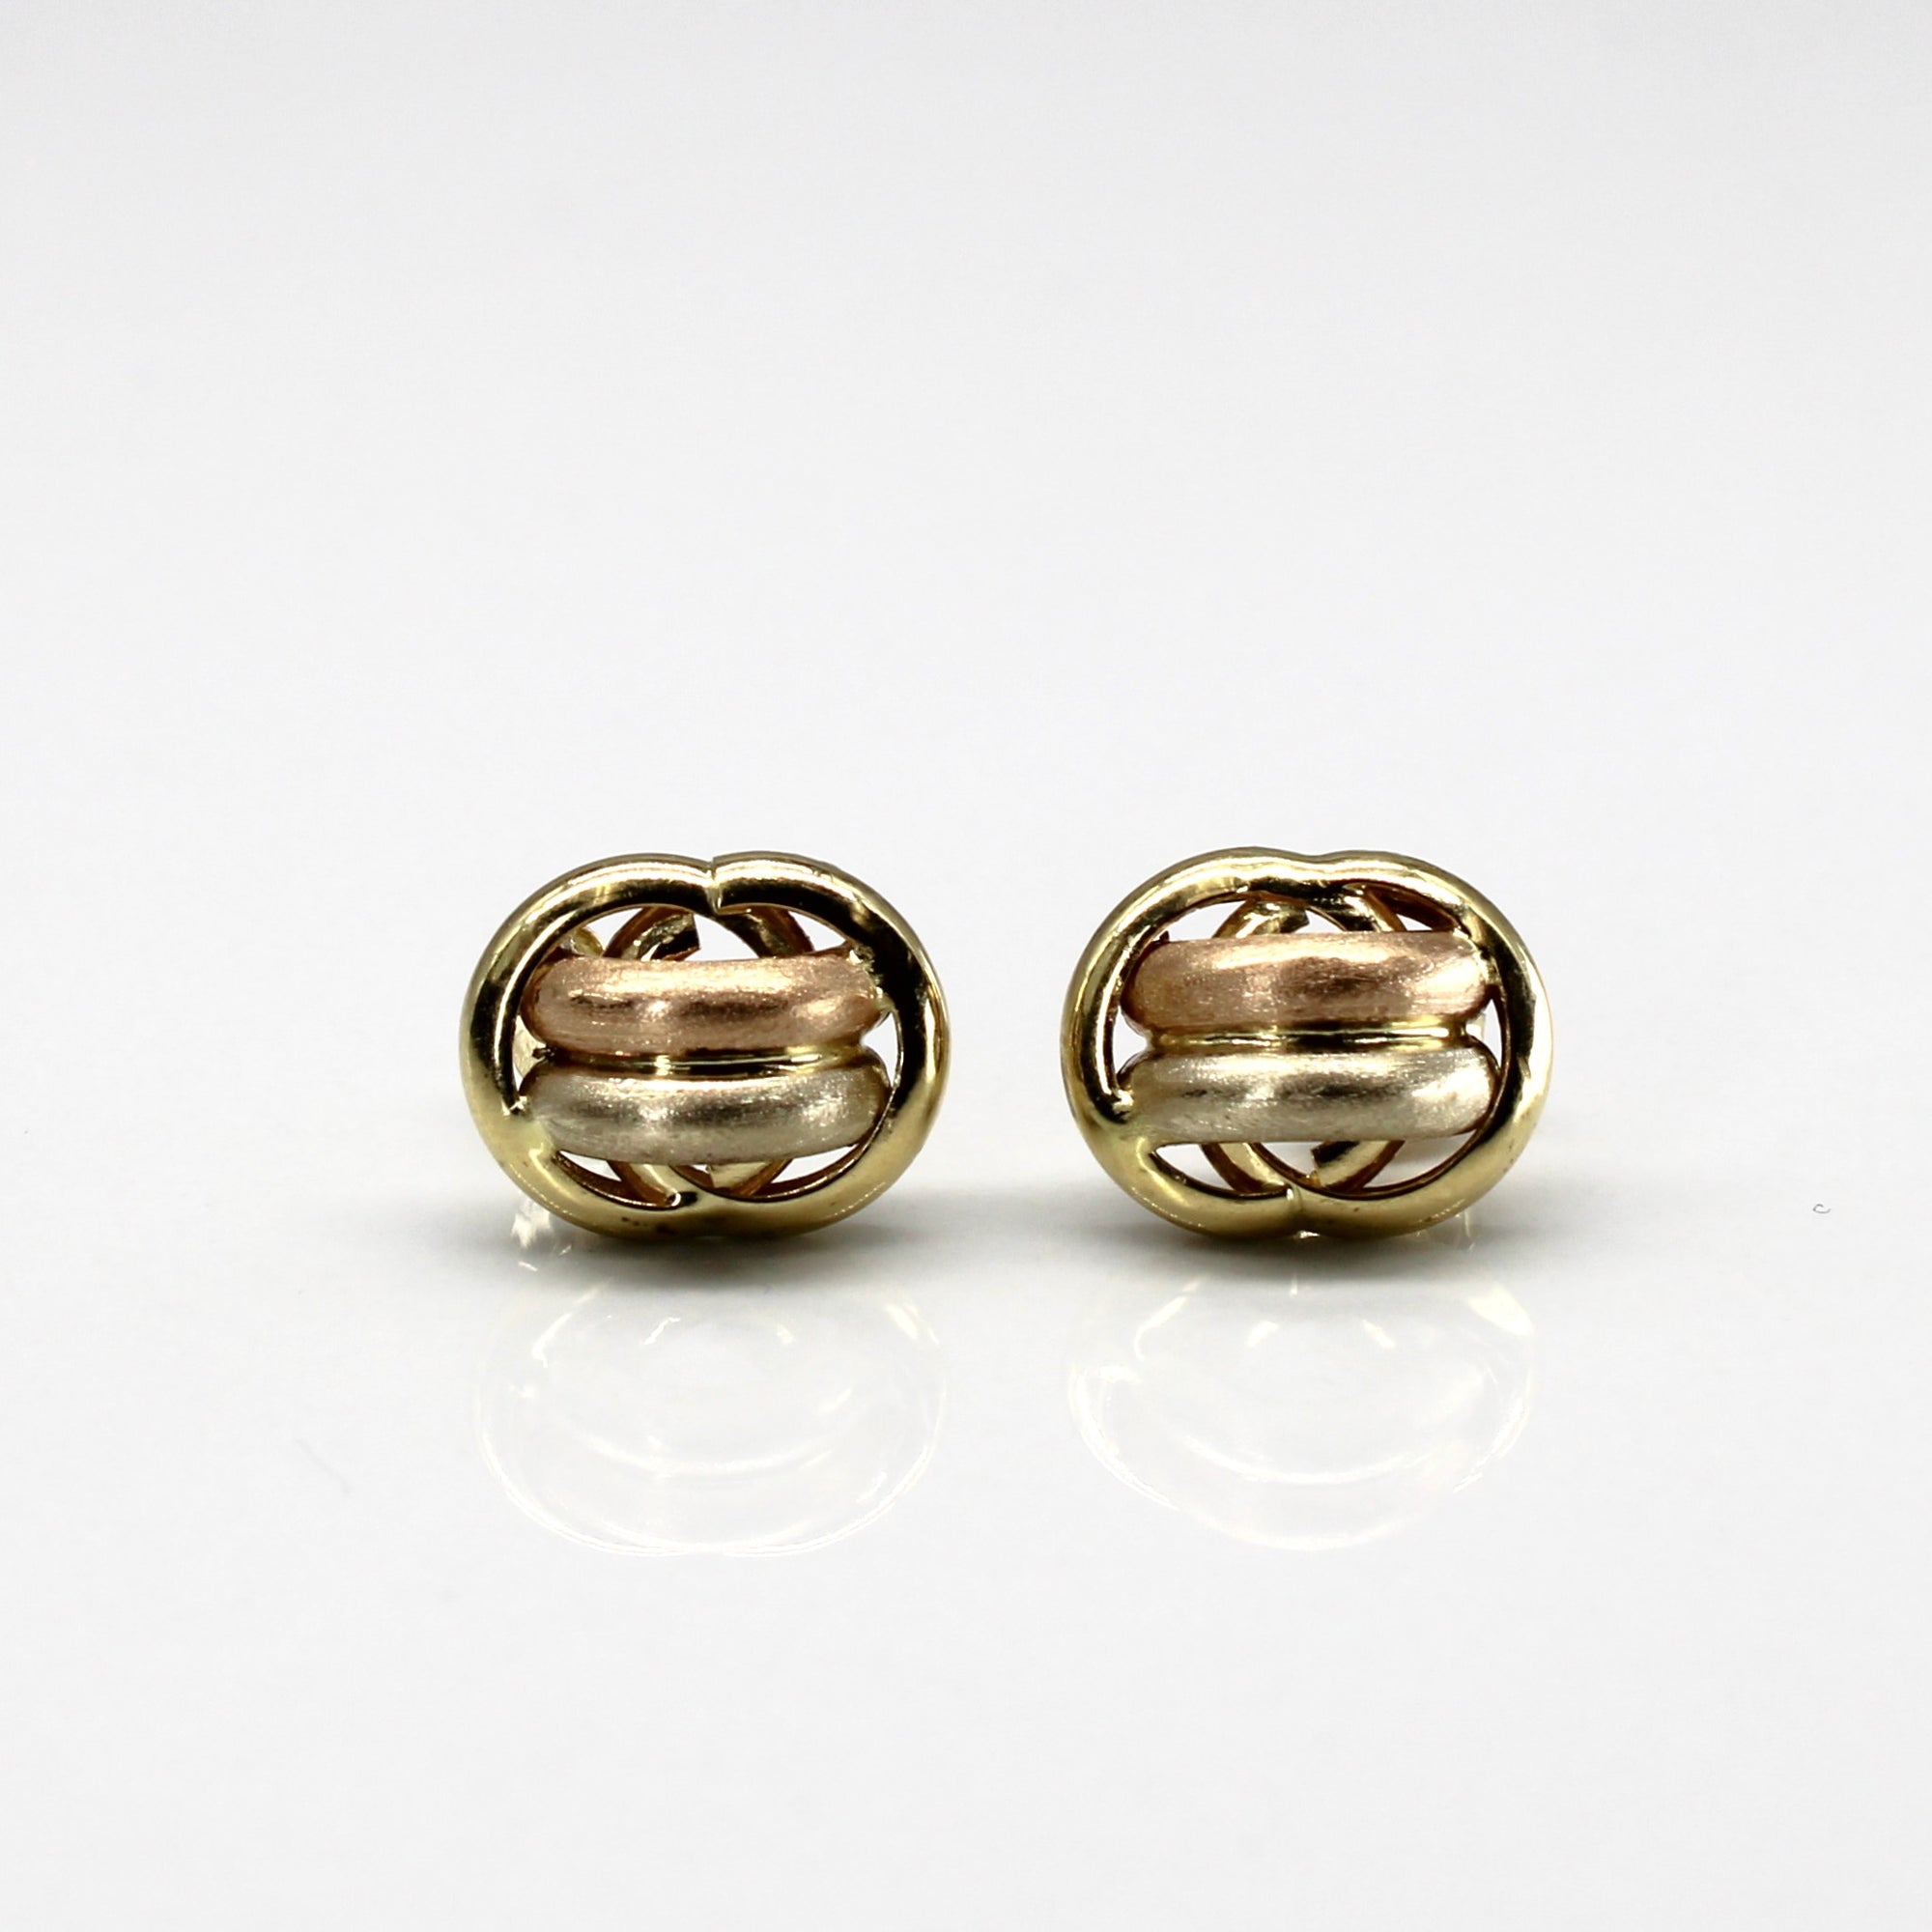 Two Tone Gold Dome Stud Earrings